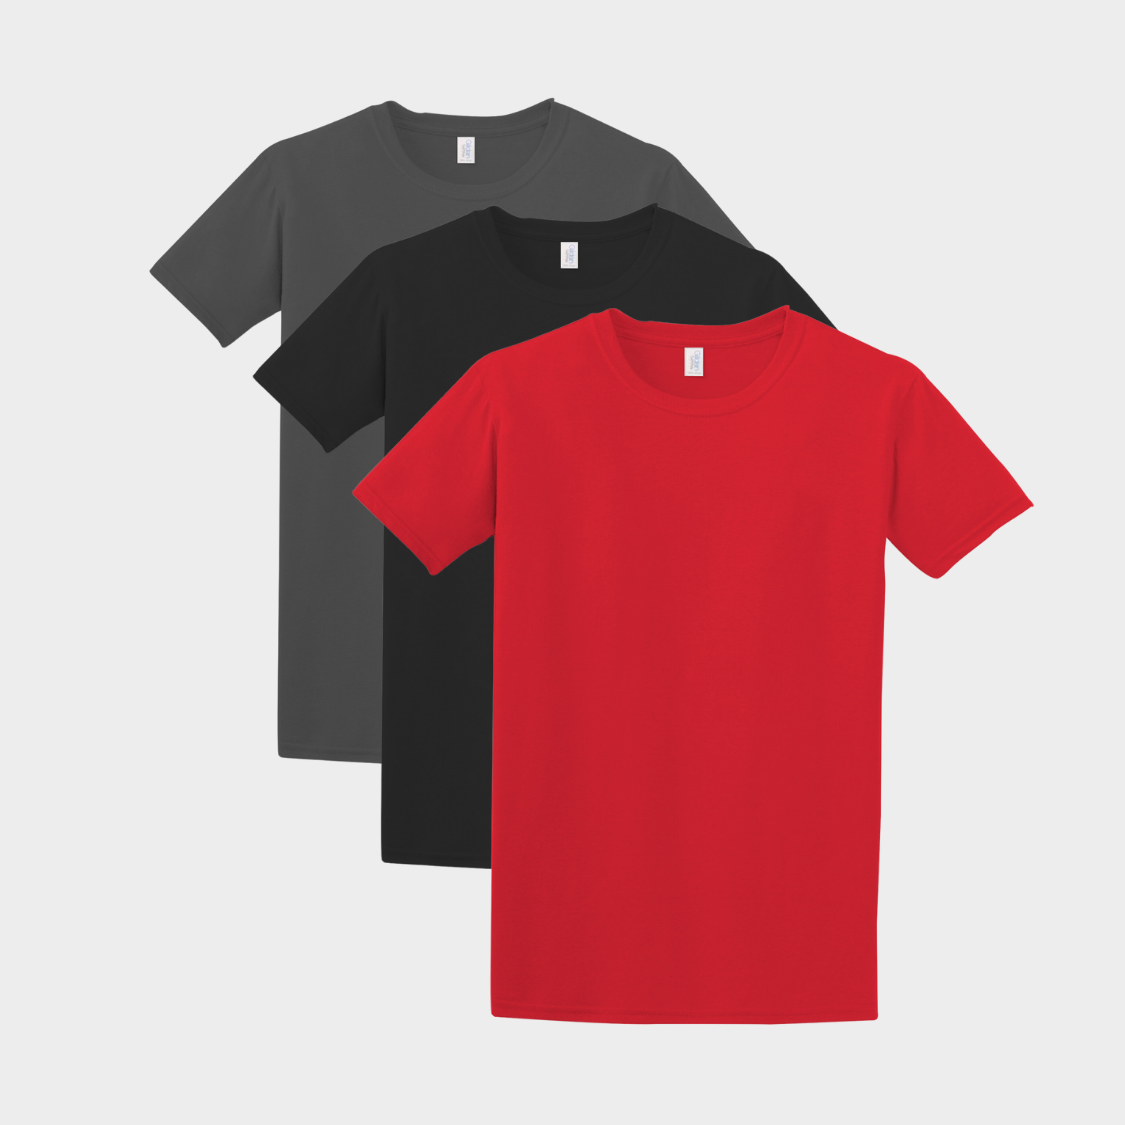 Pack of 3 solid t-shirts (Heather, Black, Red) Size S